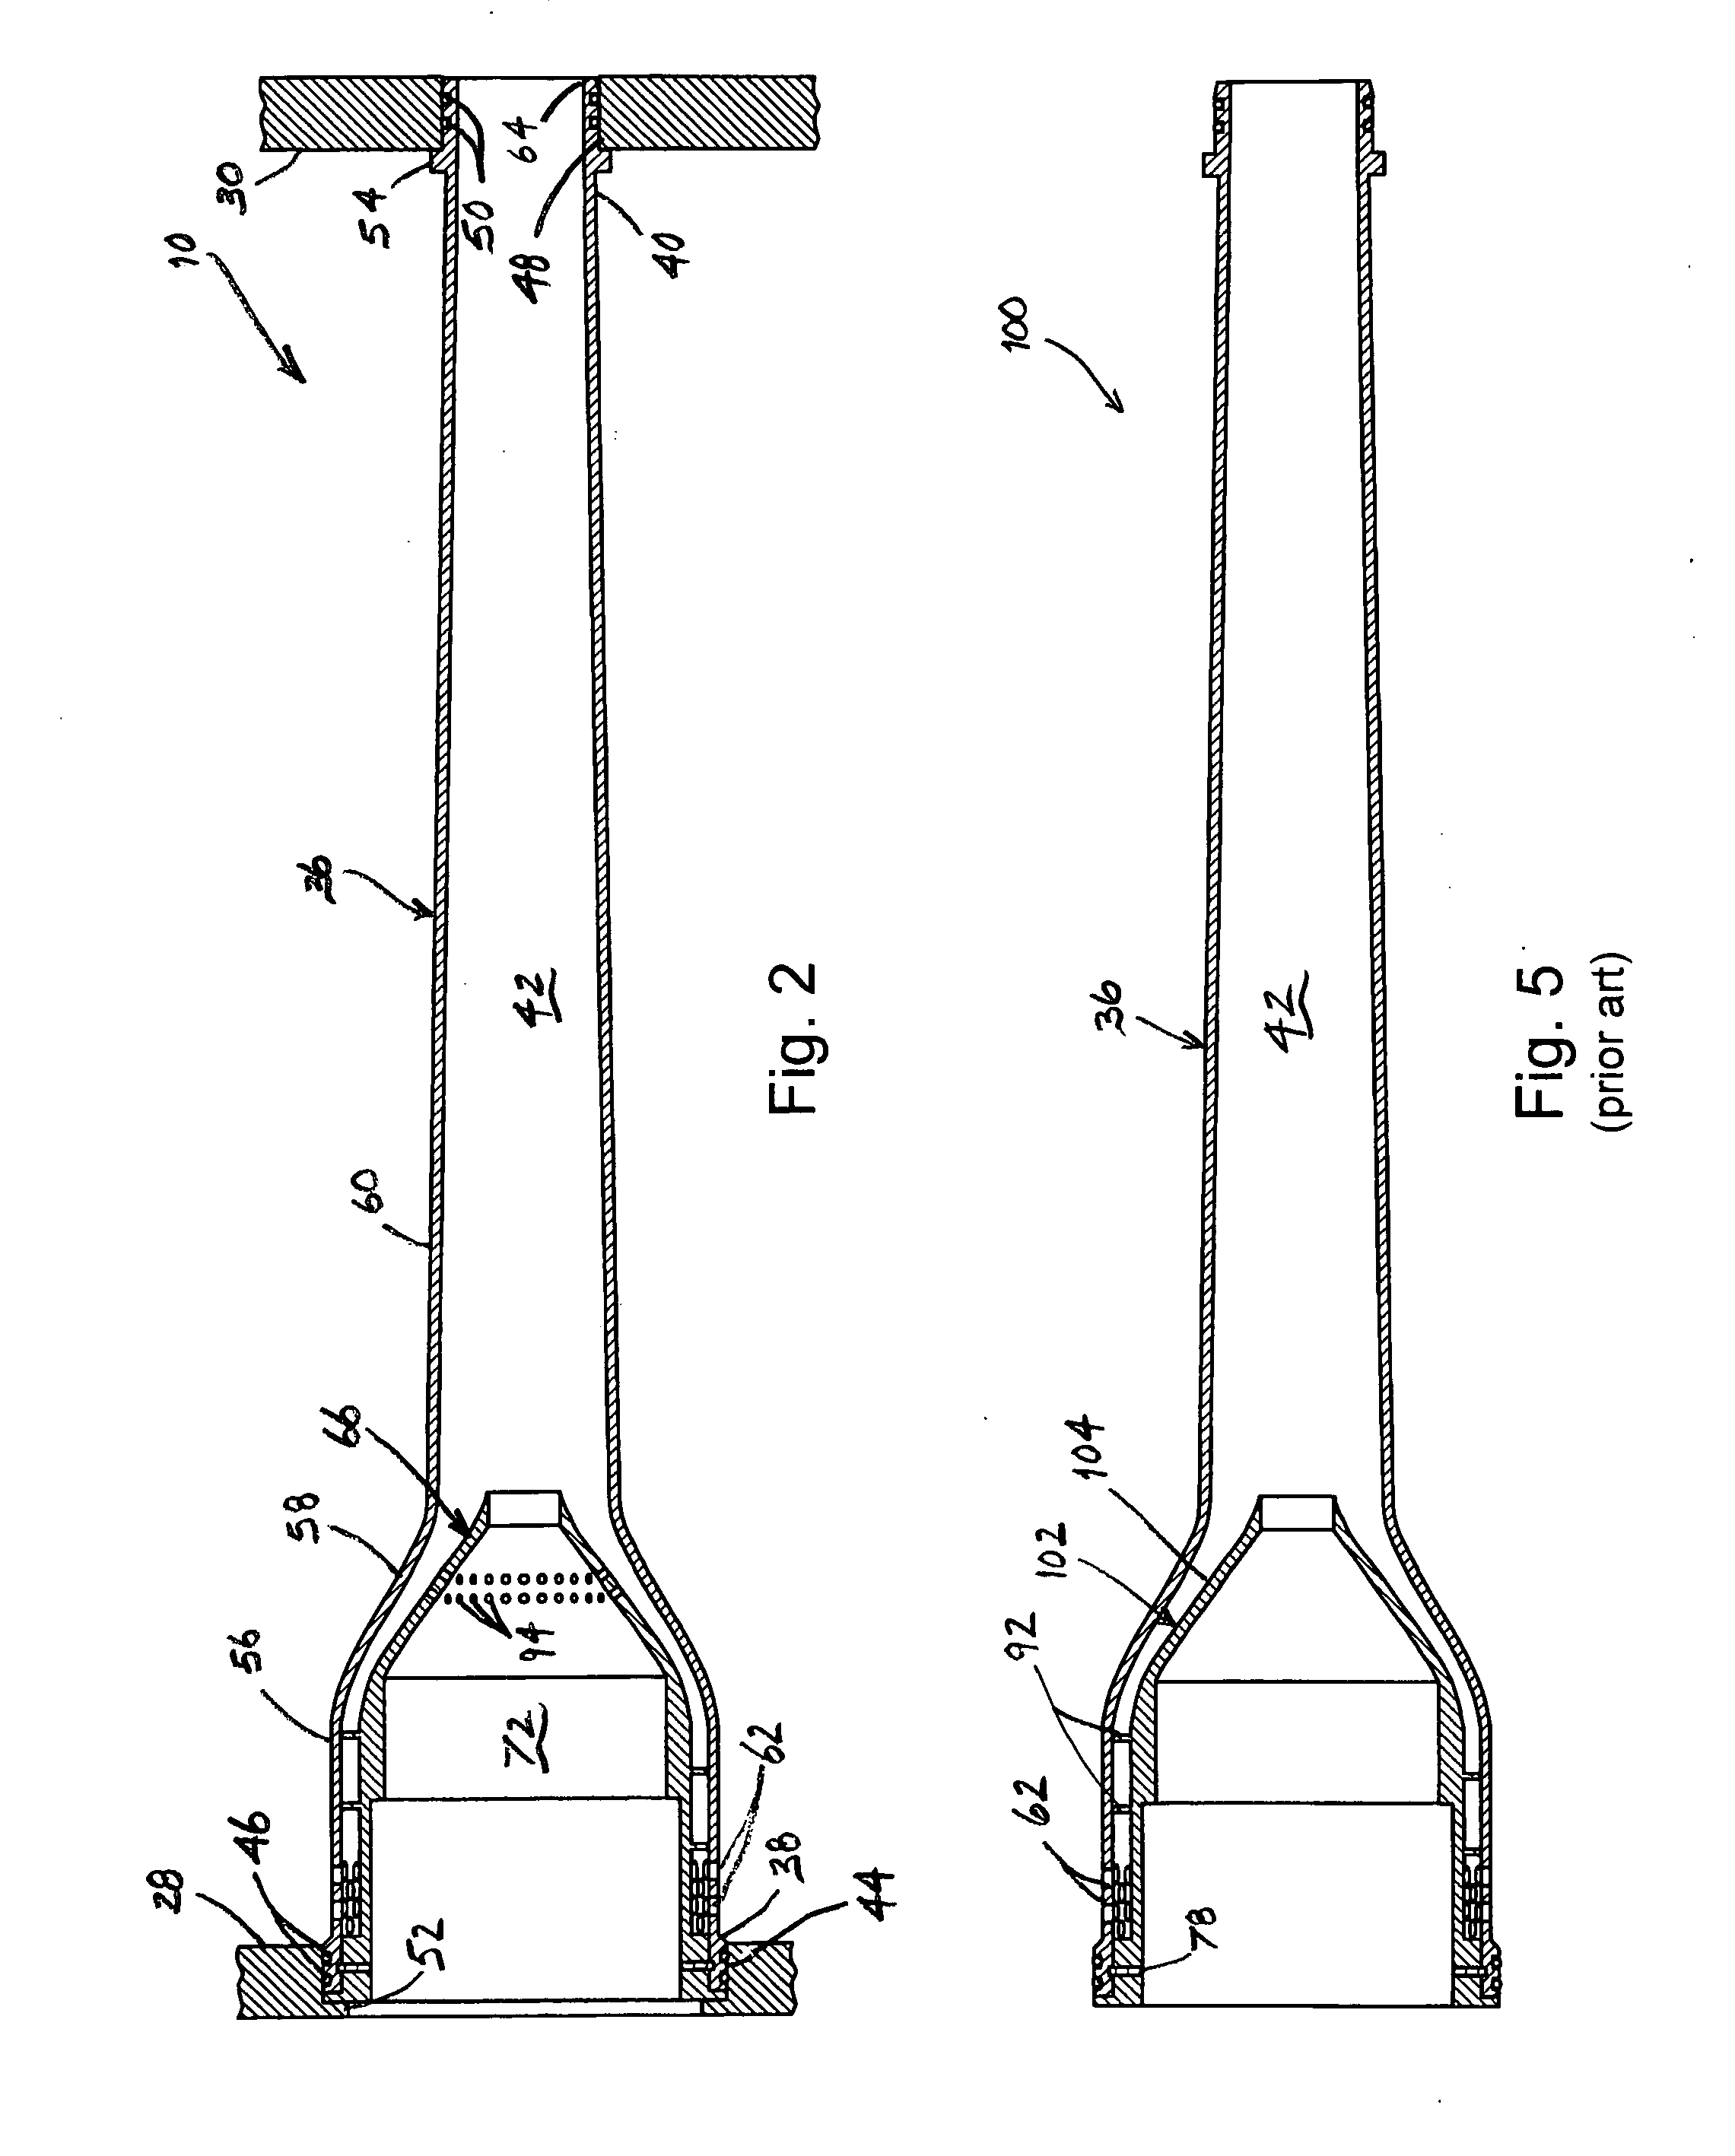 Cyclone separator for high gas volume fraction fluids